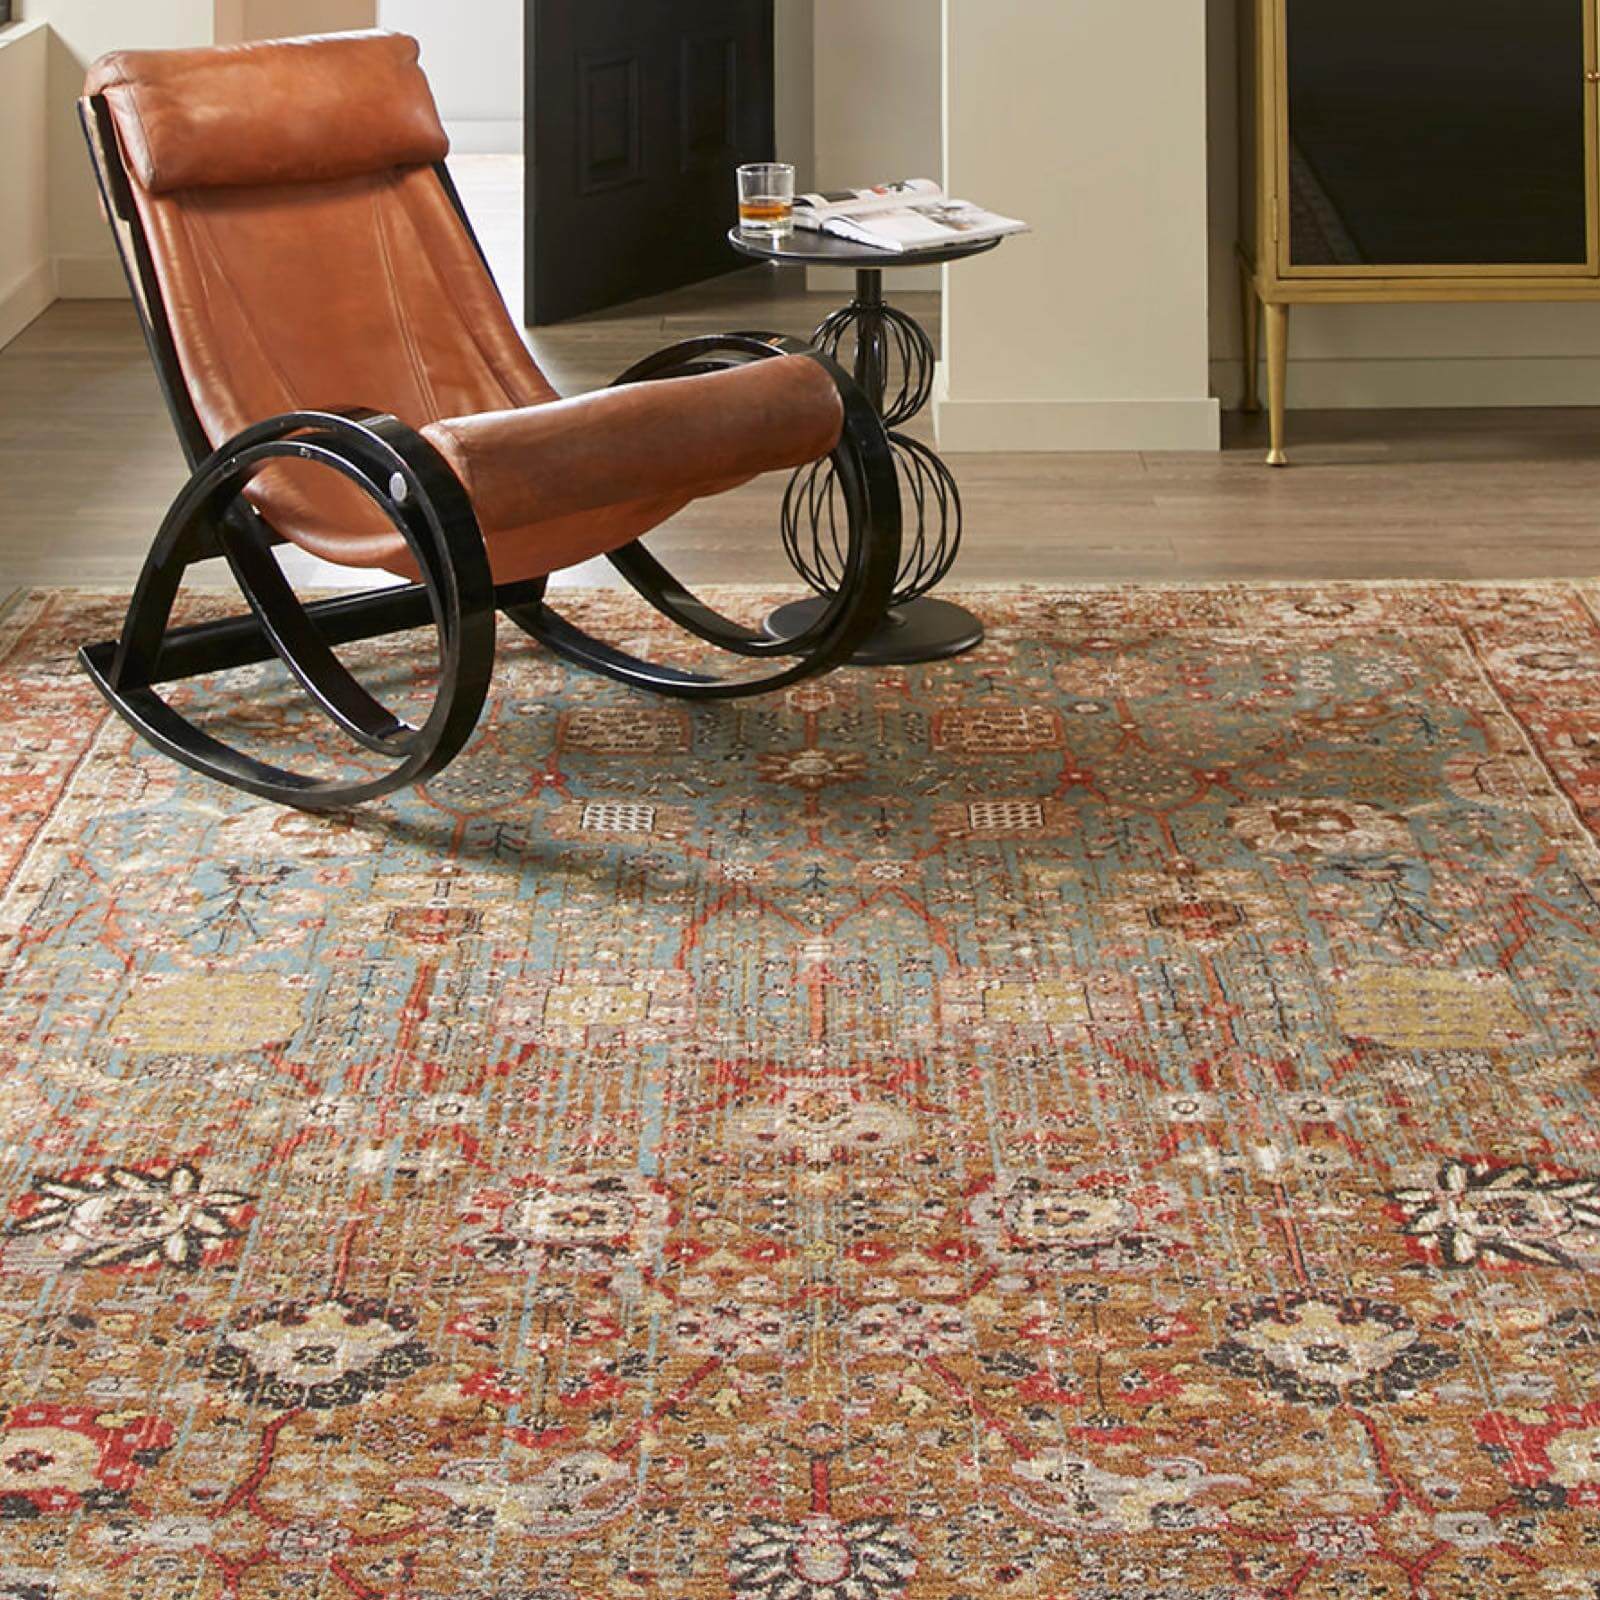 Rug with Chair | The Floor Store VA